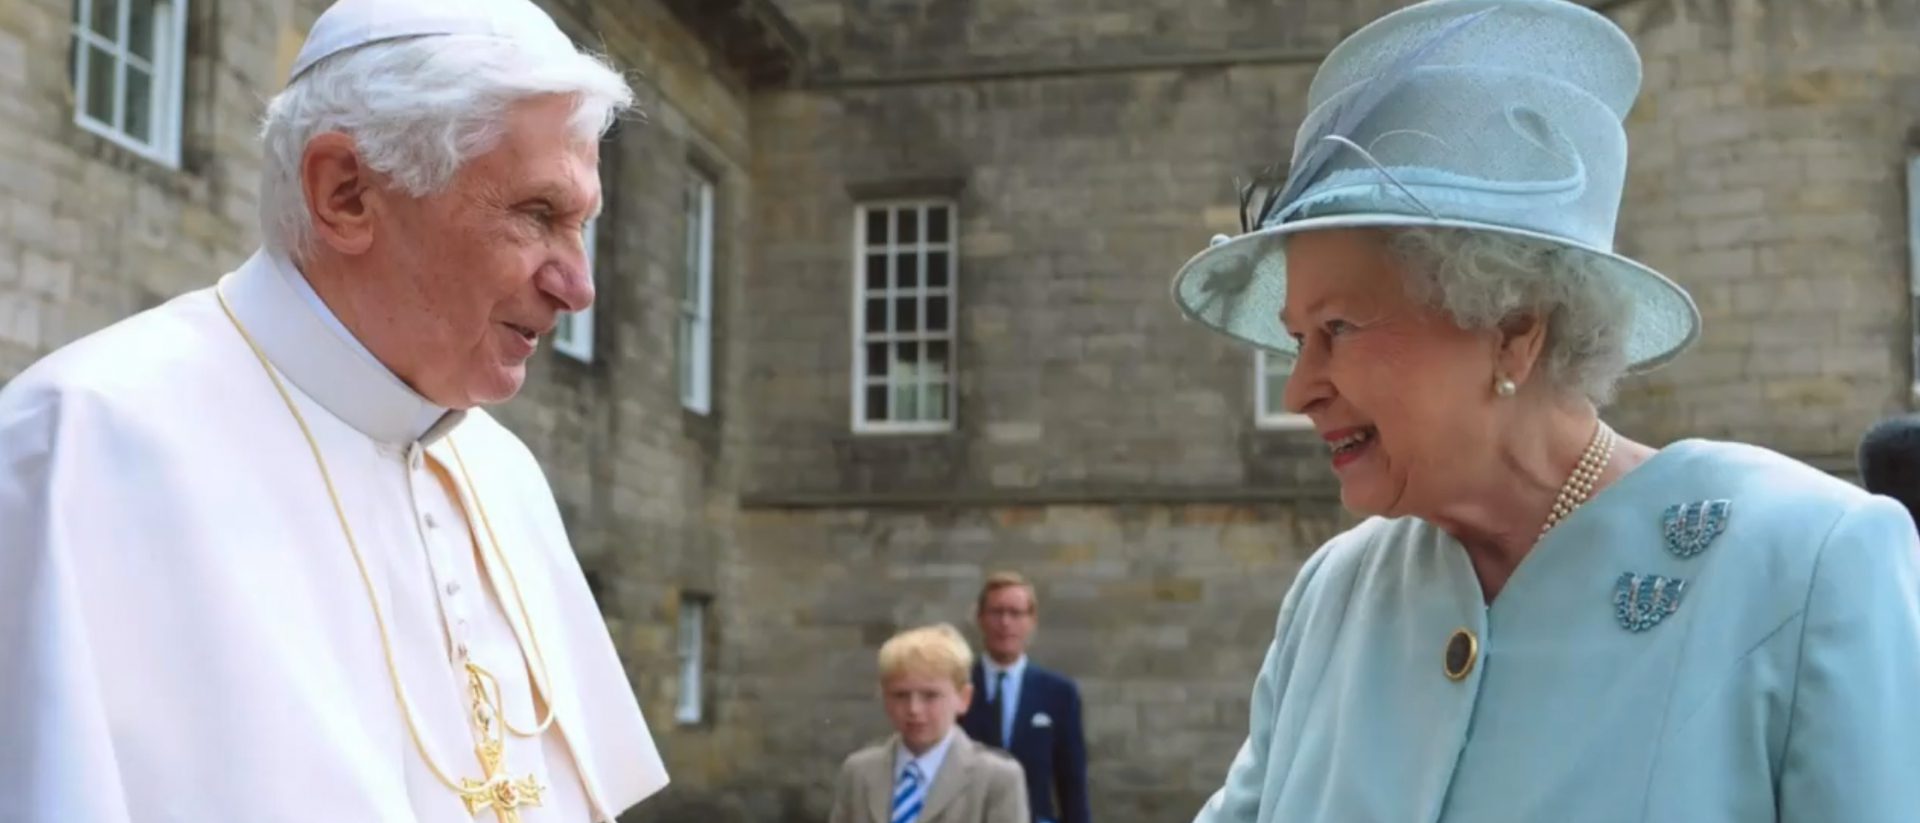 September 16, 2010: Benedict XVI visits Queen Elizabeth at Holyrood Palace, the official residence of the British Queen in Scotland.